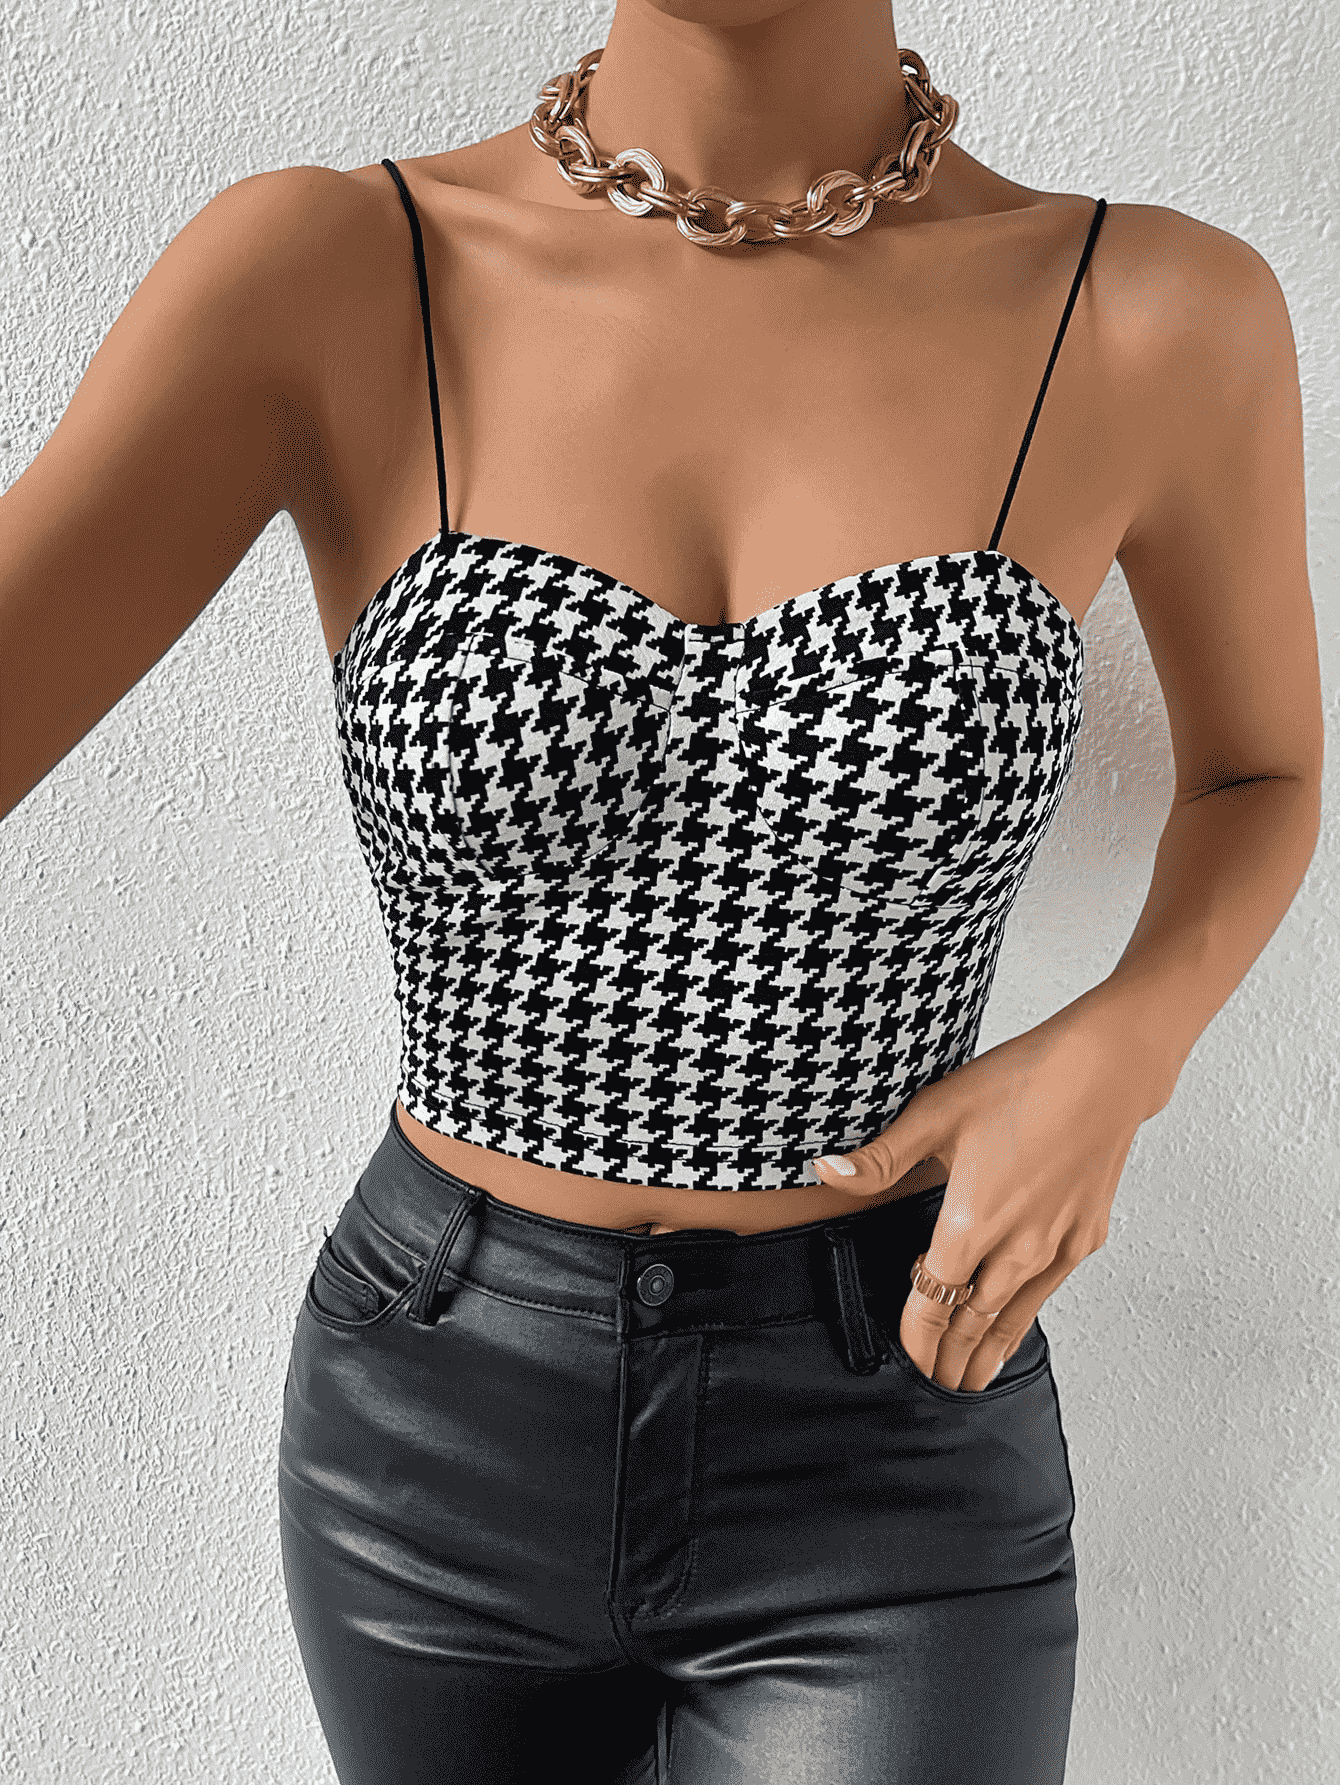 Cropped Sweetheart Neck Houndstooth Pattern Cami - Guy Christopher